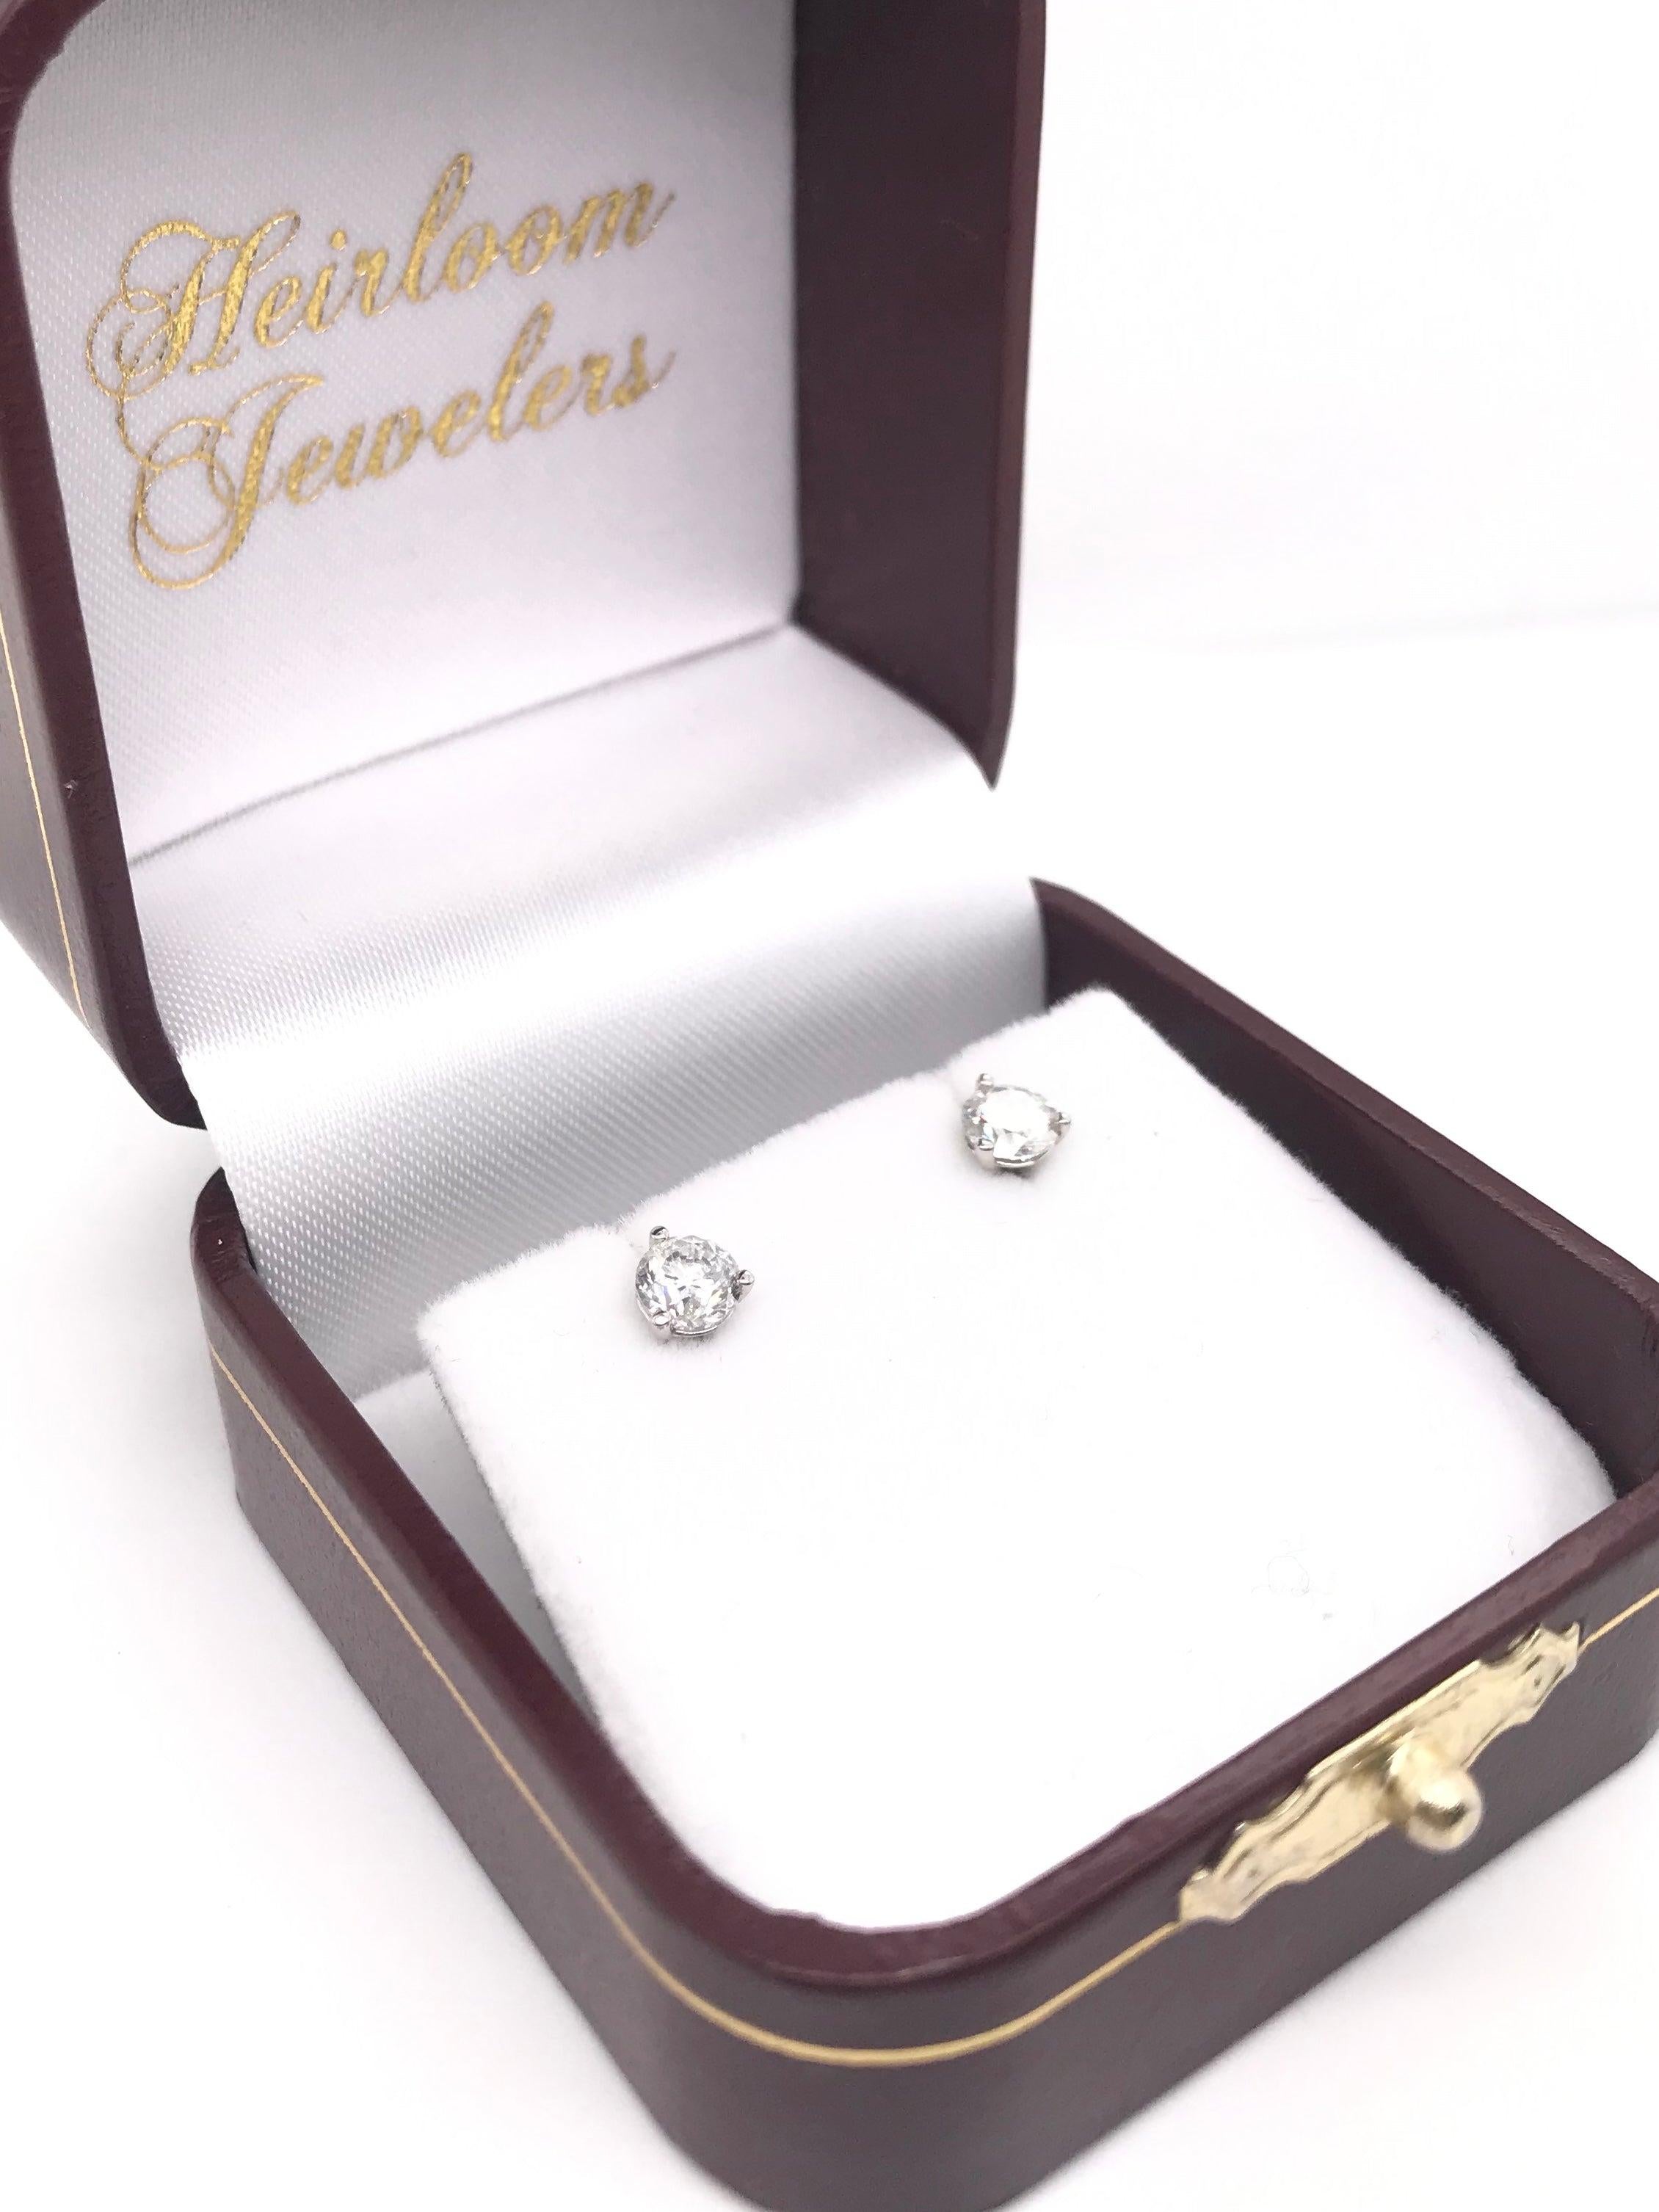 These contemporary style diamond earrings feature approximately 0.75 carats of diamonds; combined total weight. The settings are 14k white gold and are 